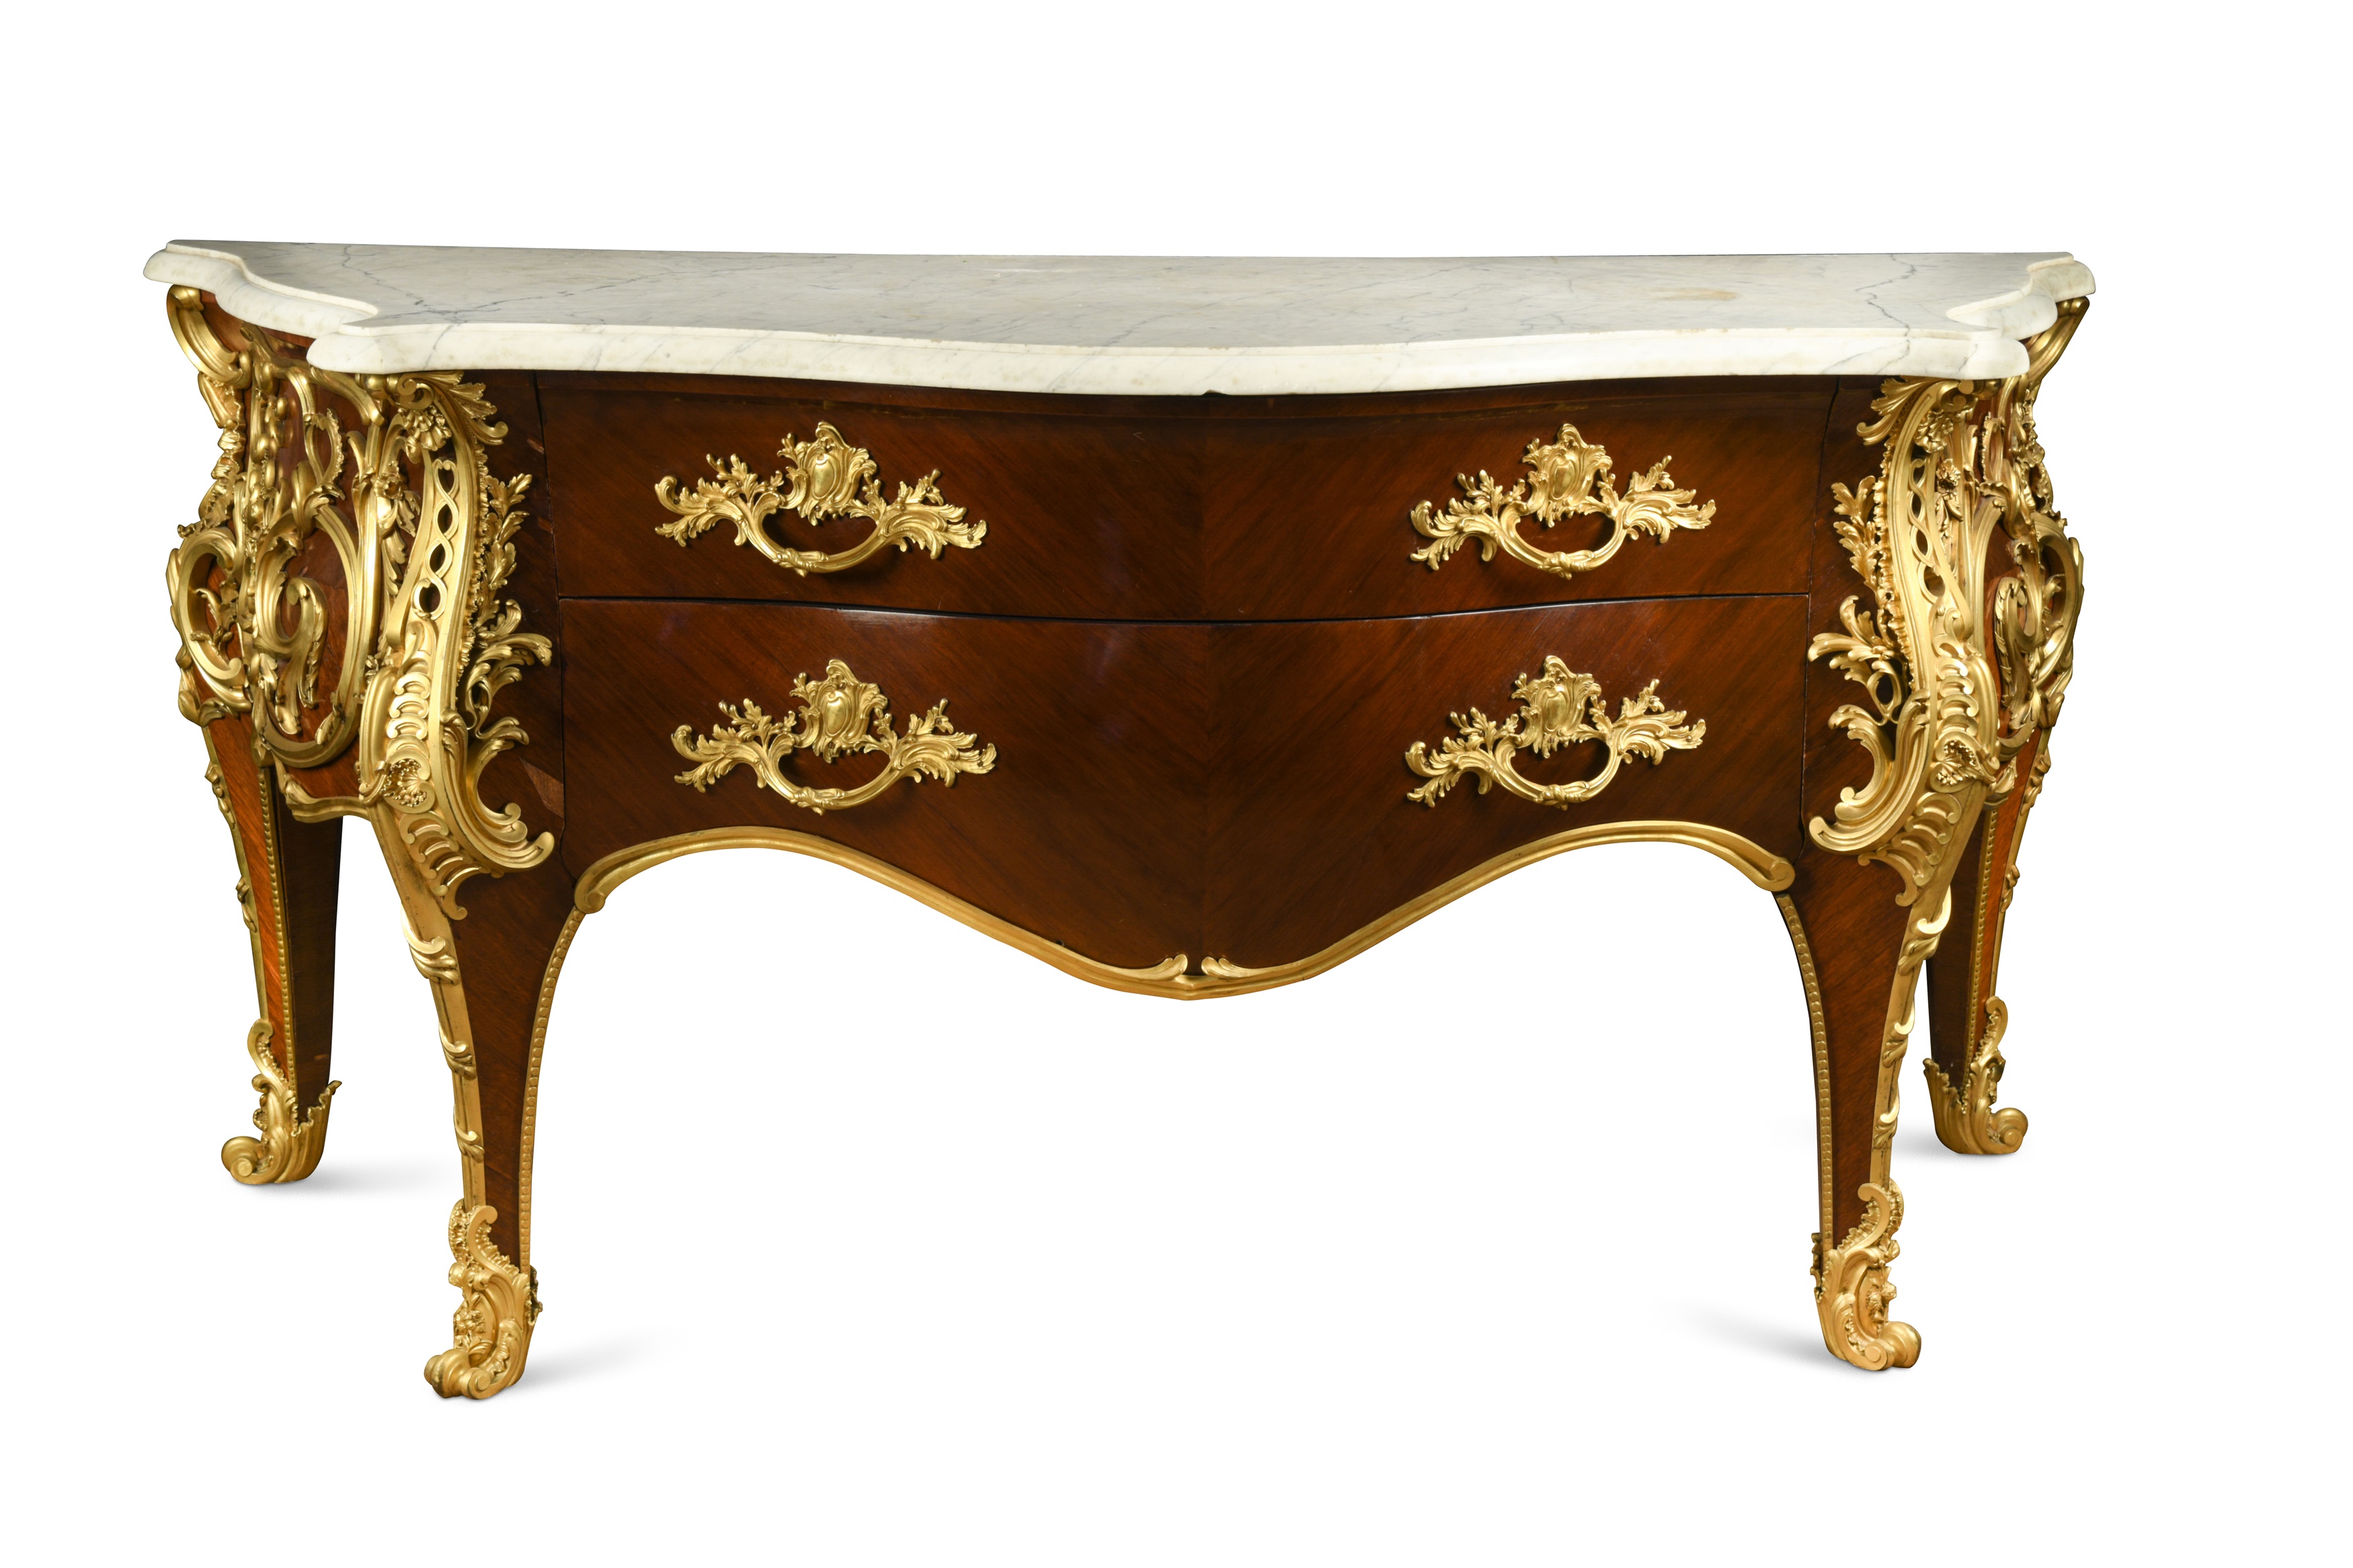 A Louis XV style ormolu mounted kingwood commode by Henry Dasson,